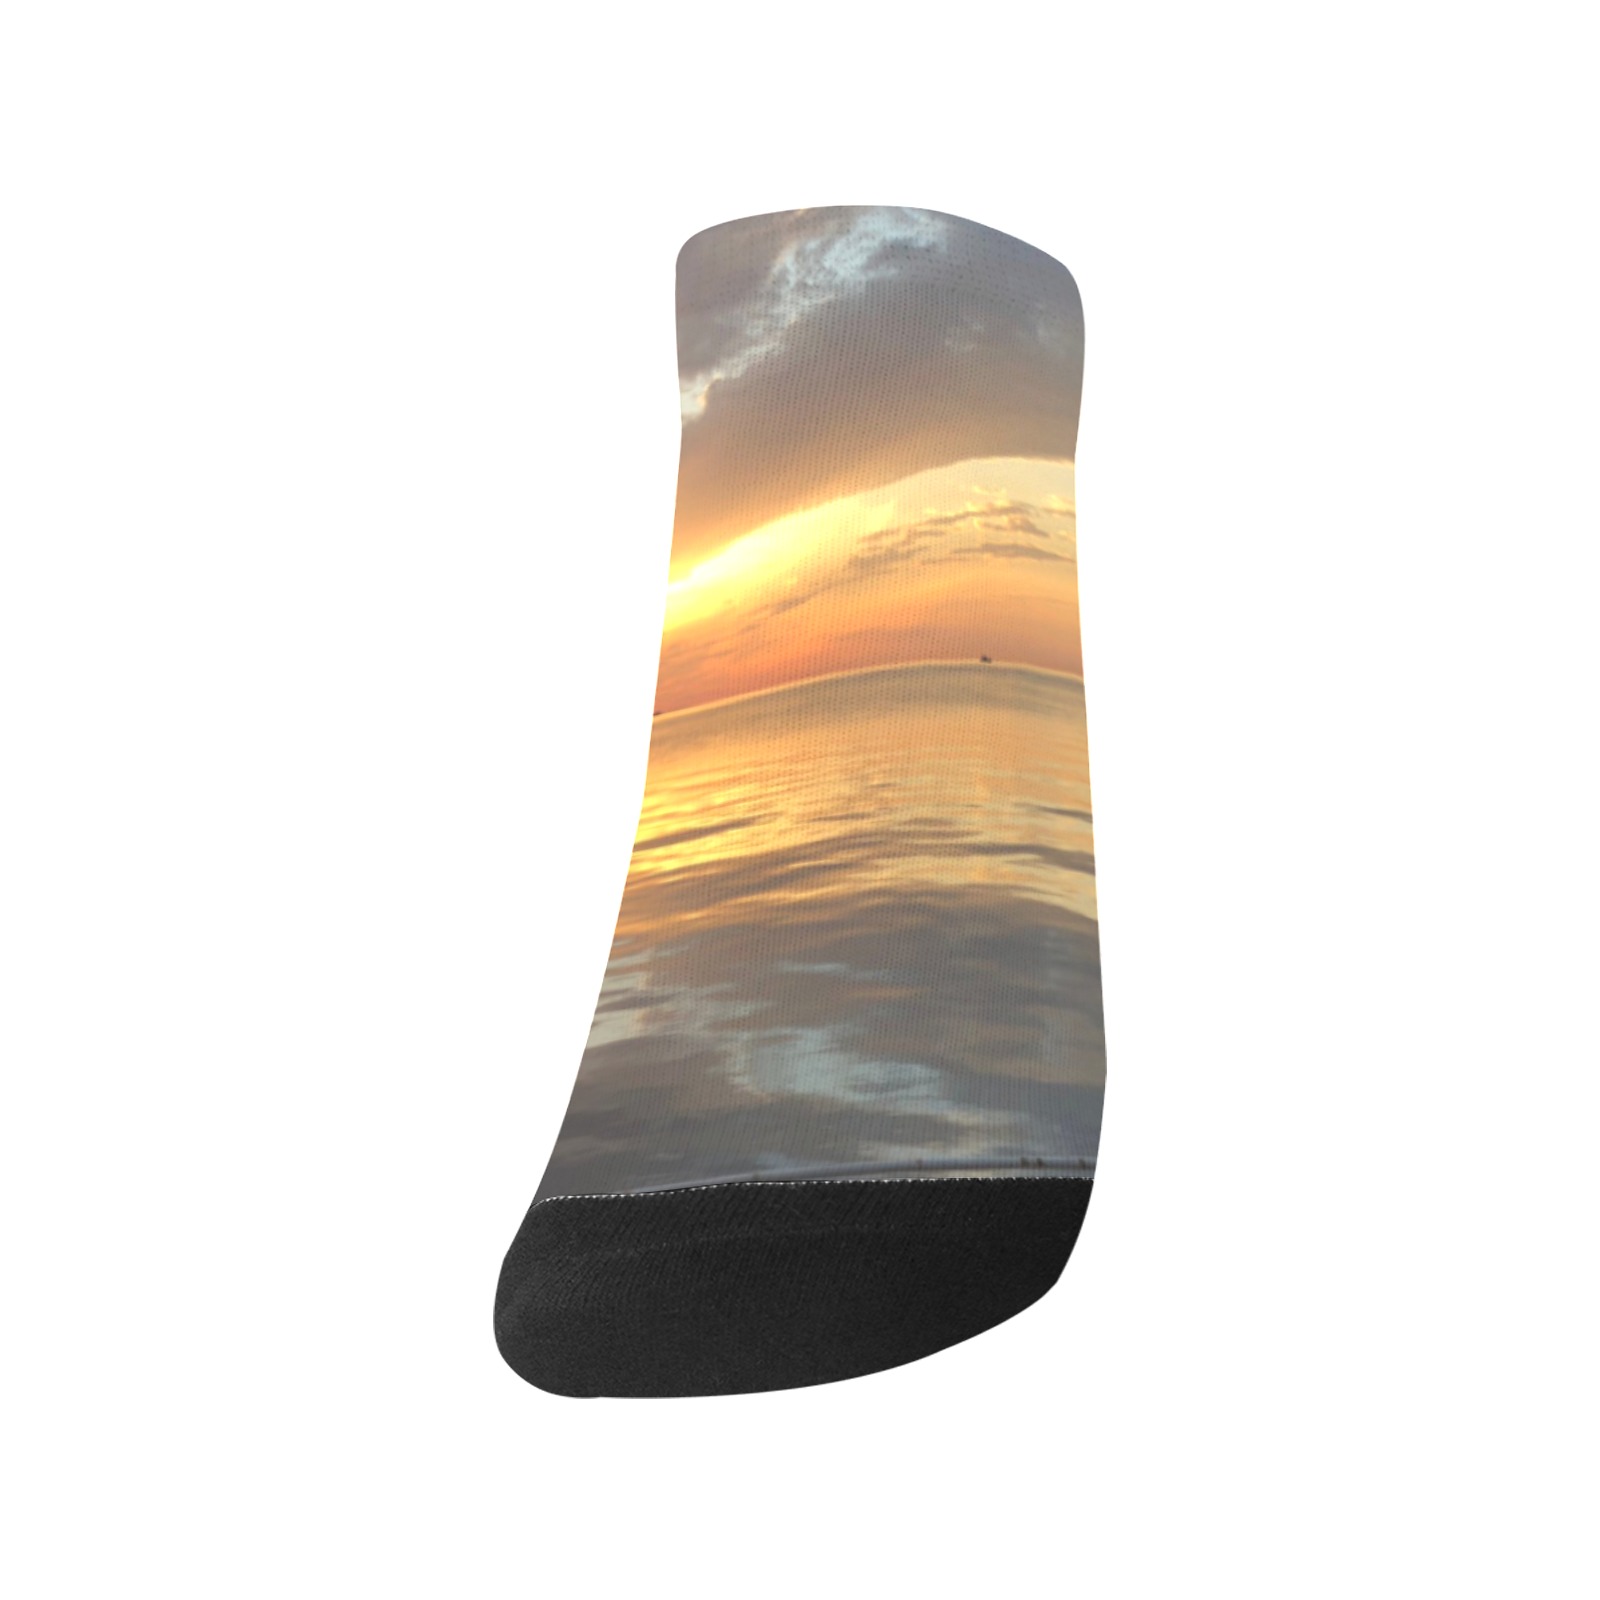 Pier Sunset Collection Women's Ankle Socks